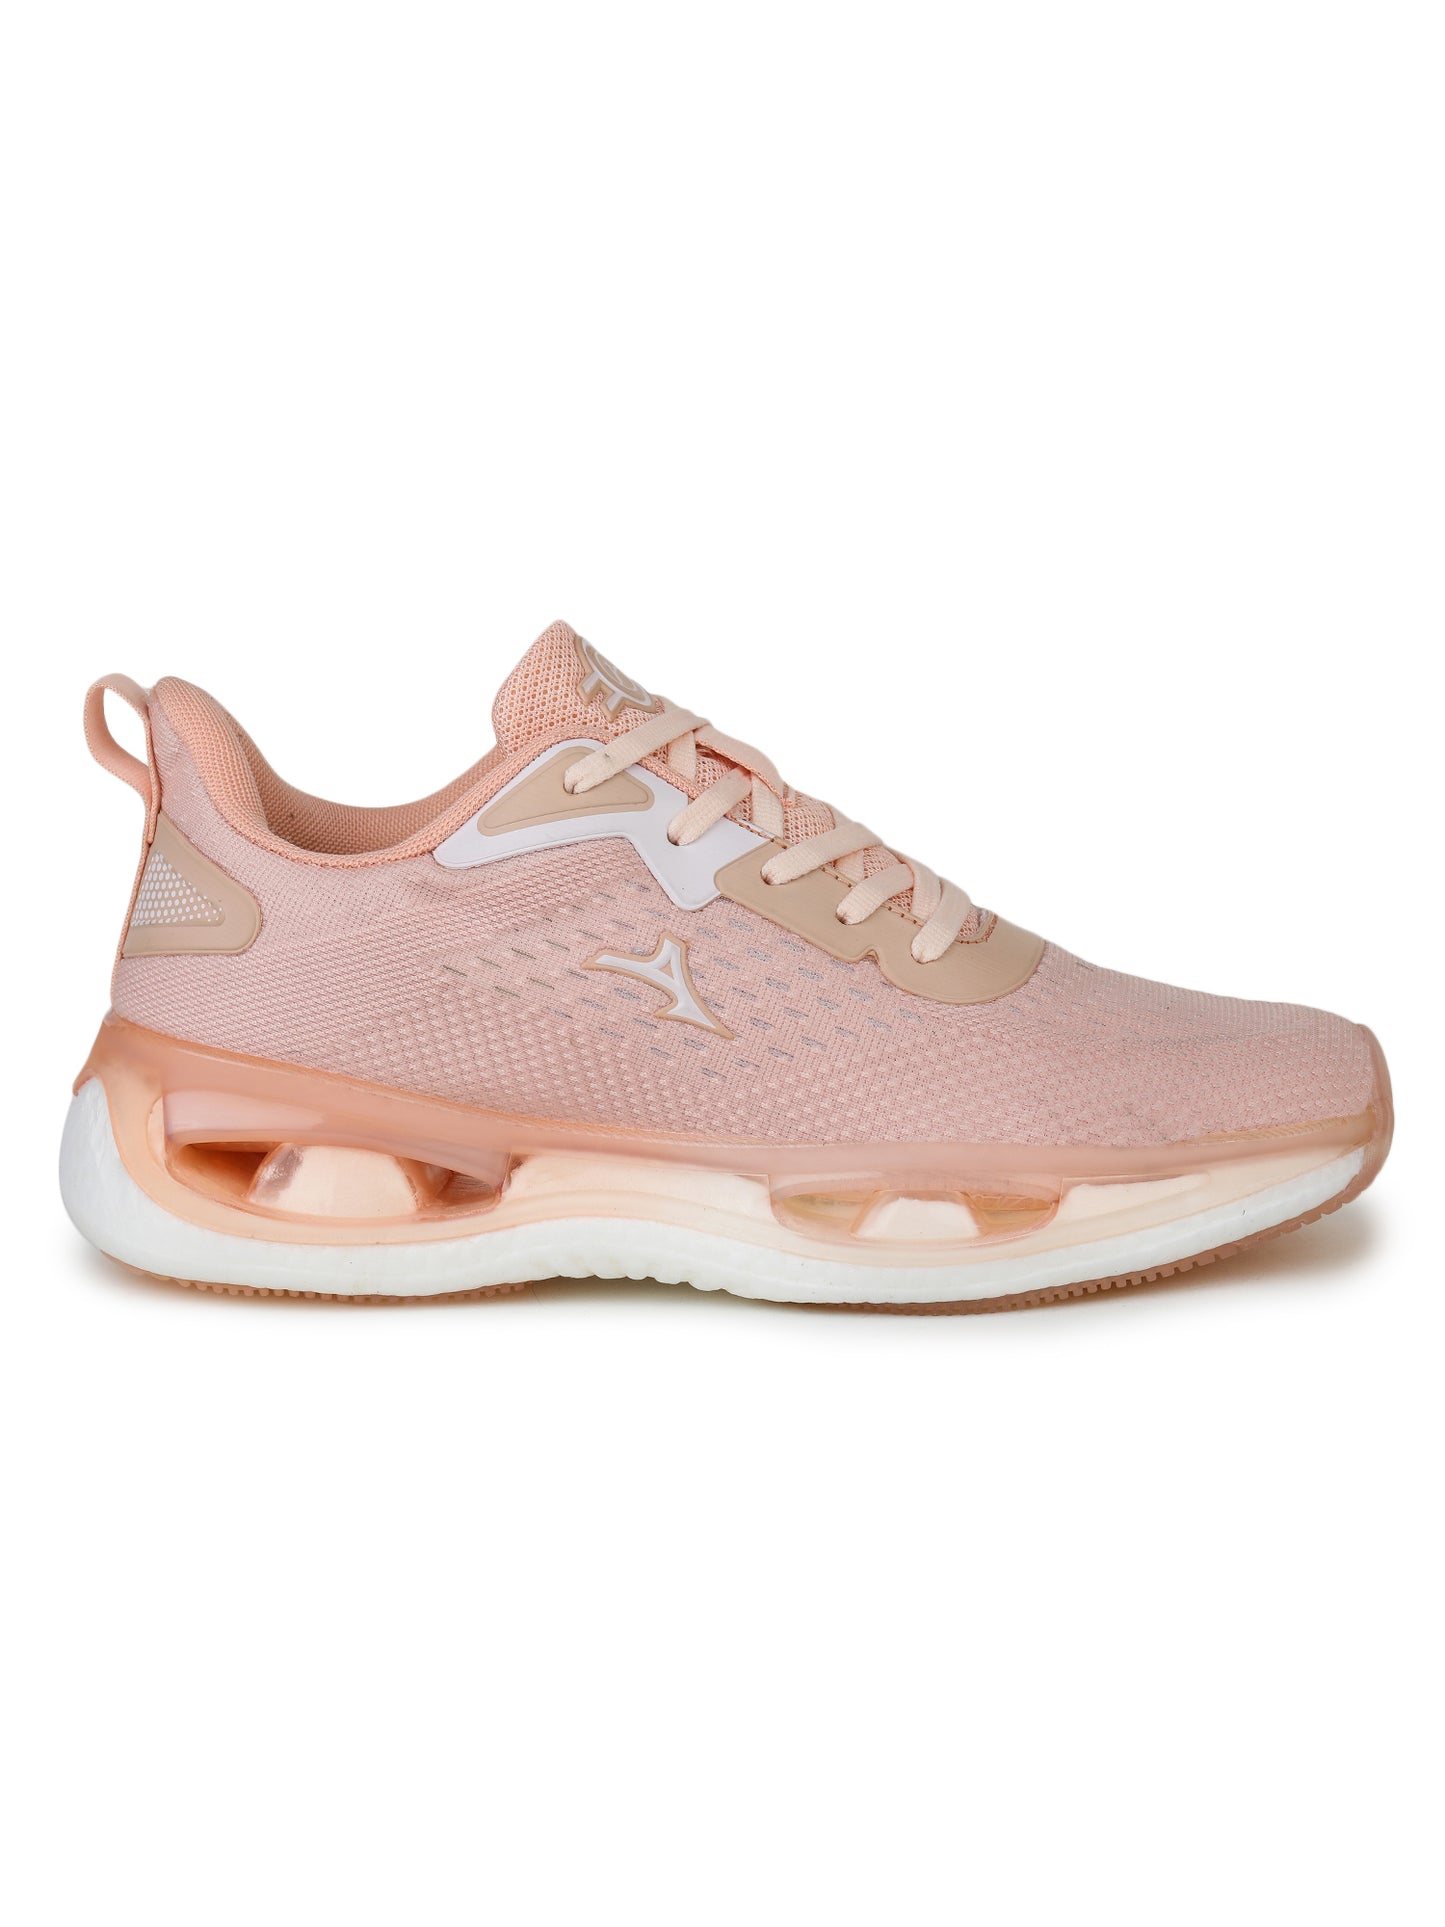 ABROS VERNA SPORTS SHOES FOR WOMEN